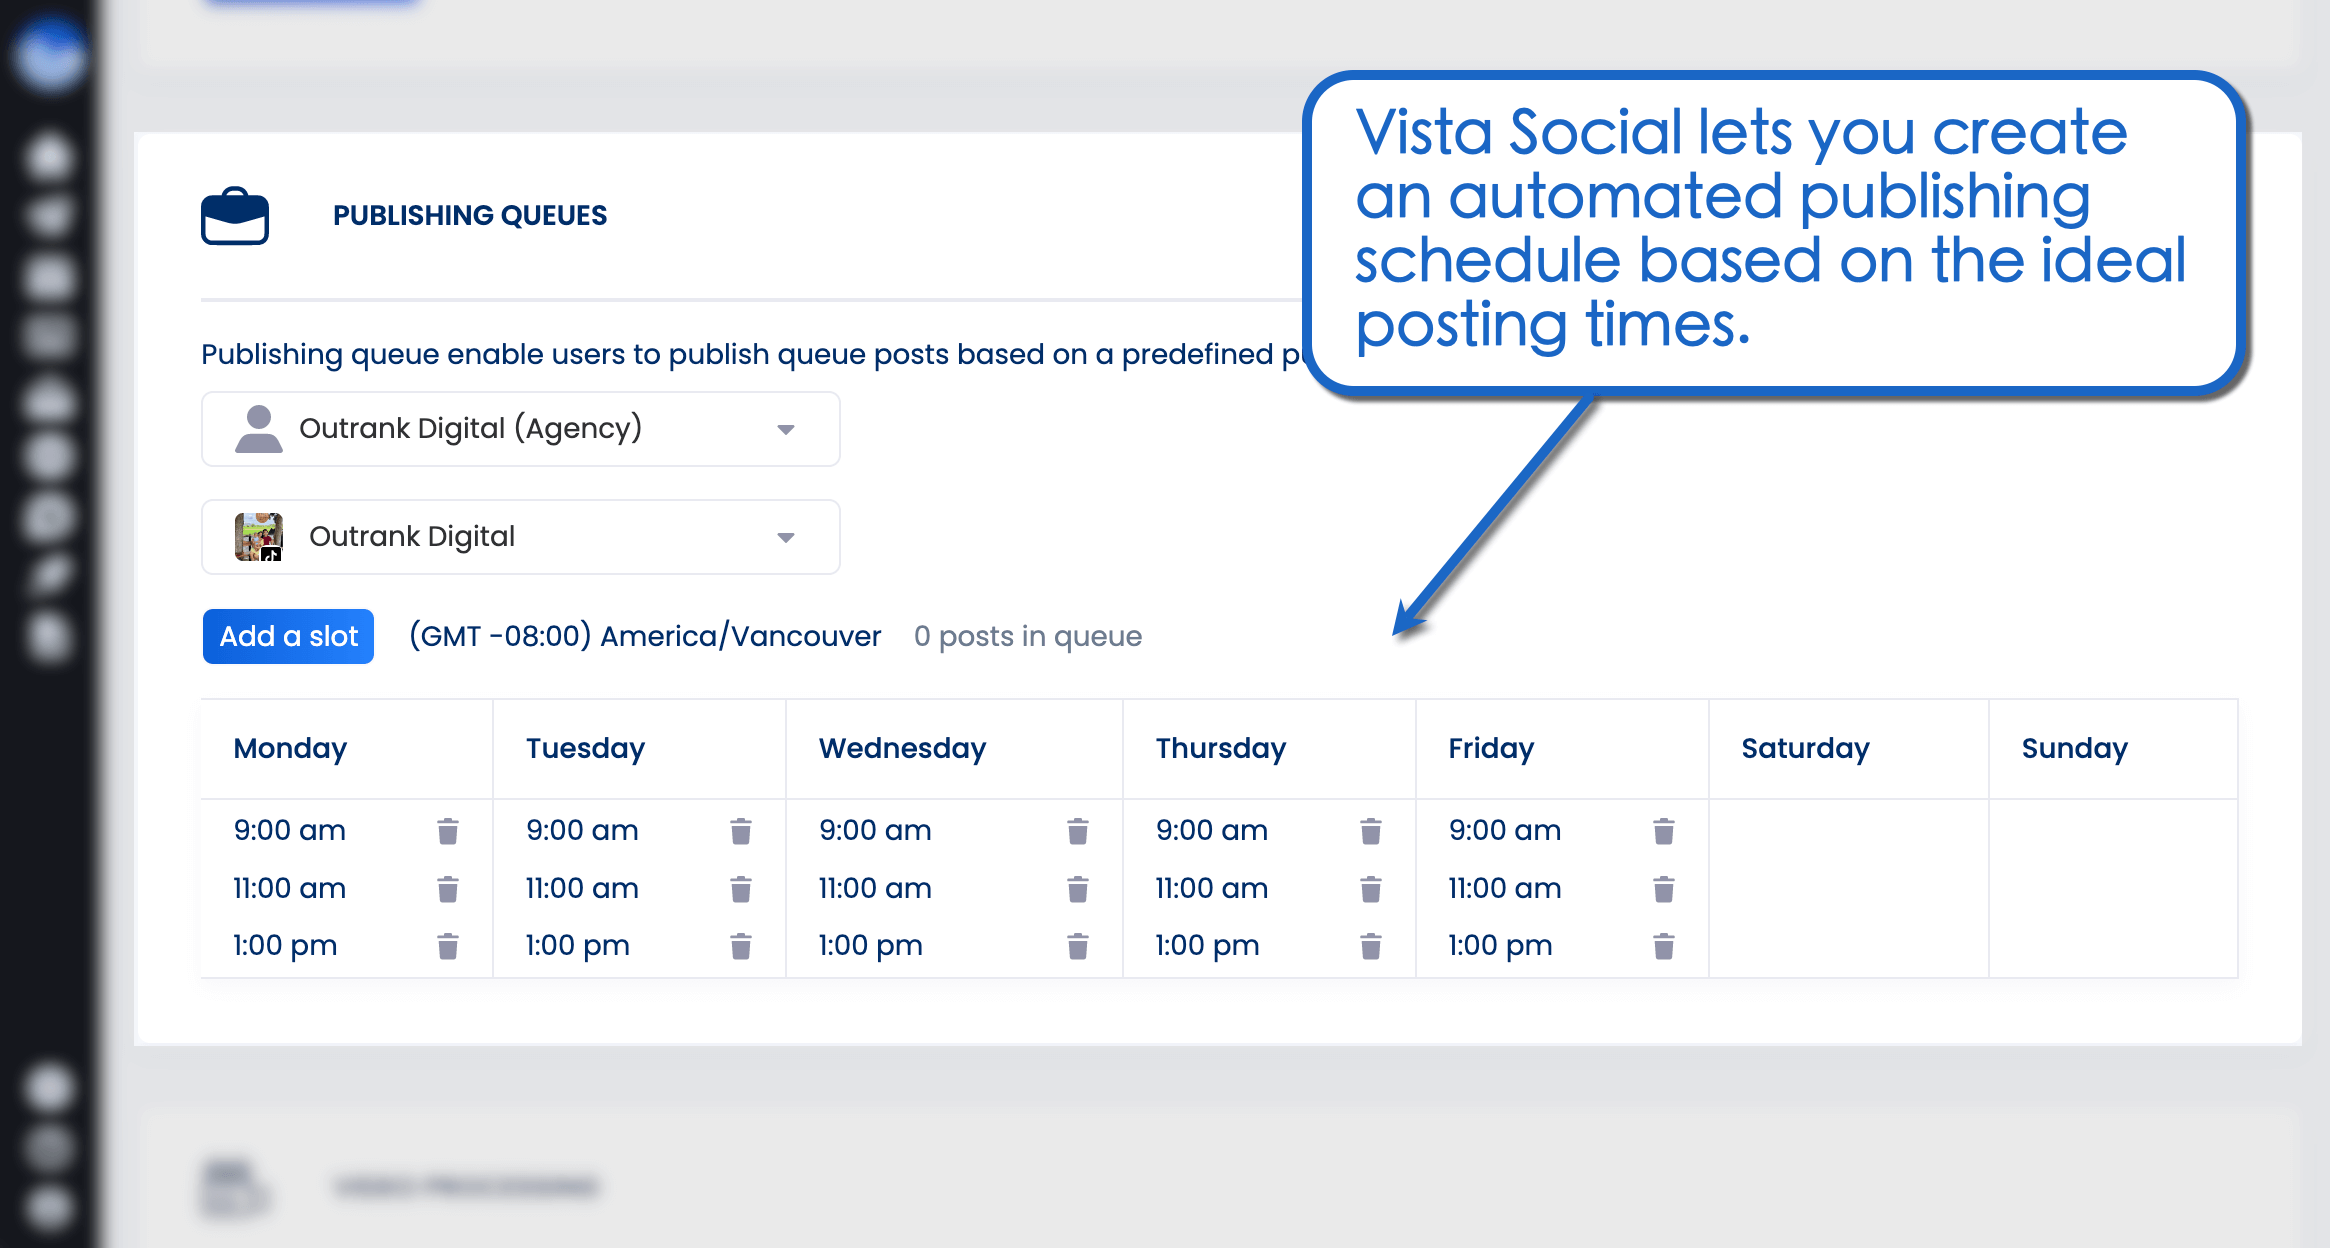 Use Vista Social to automate your social media publishing.